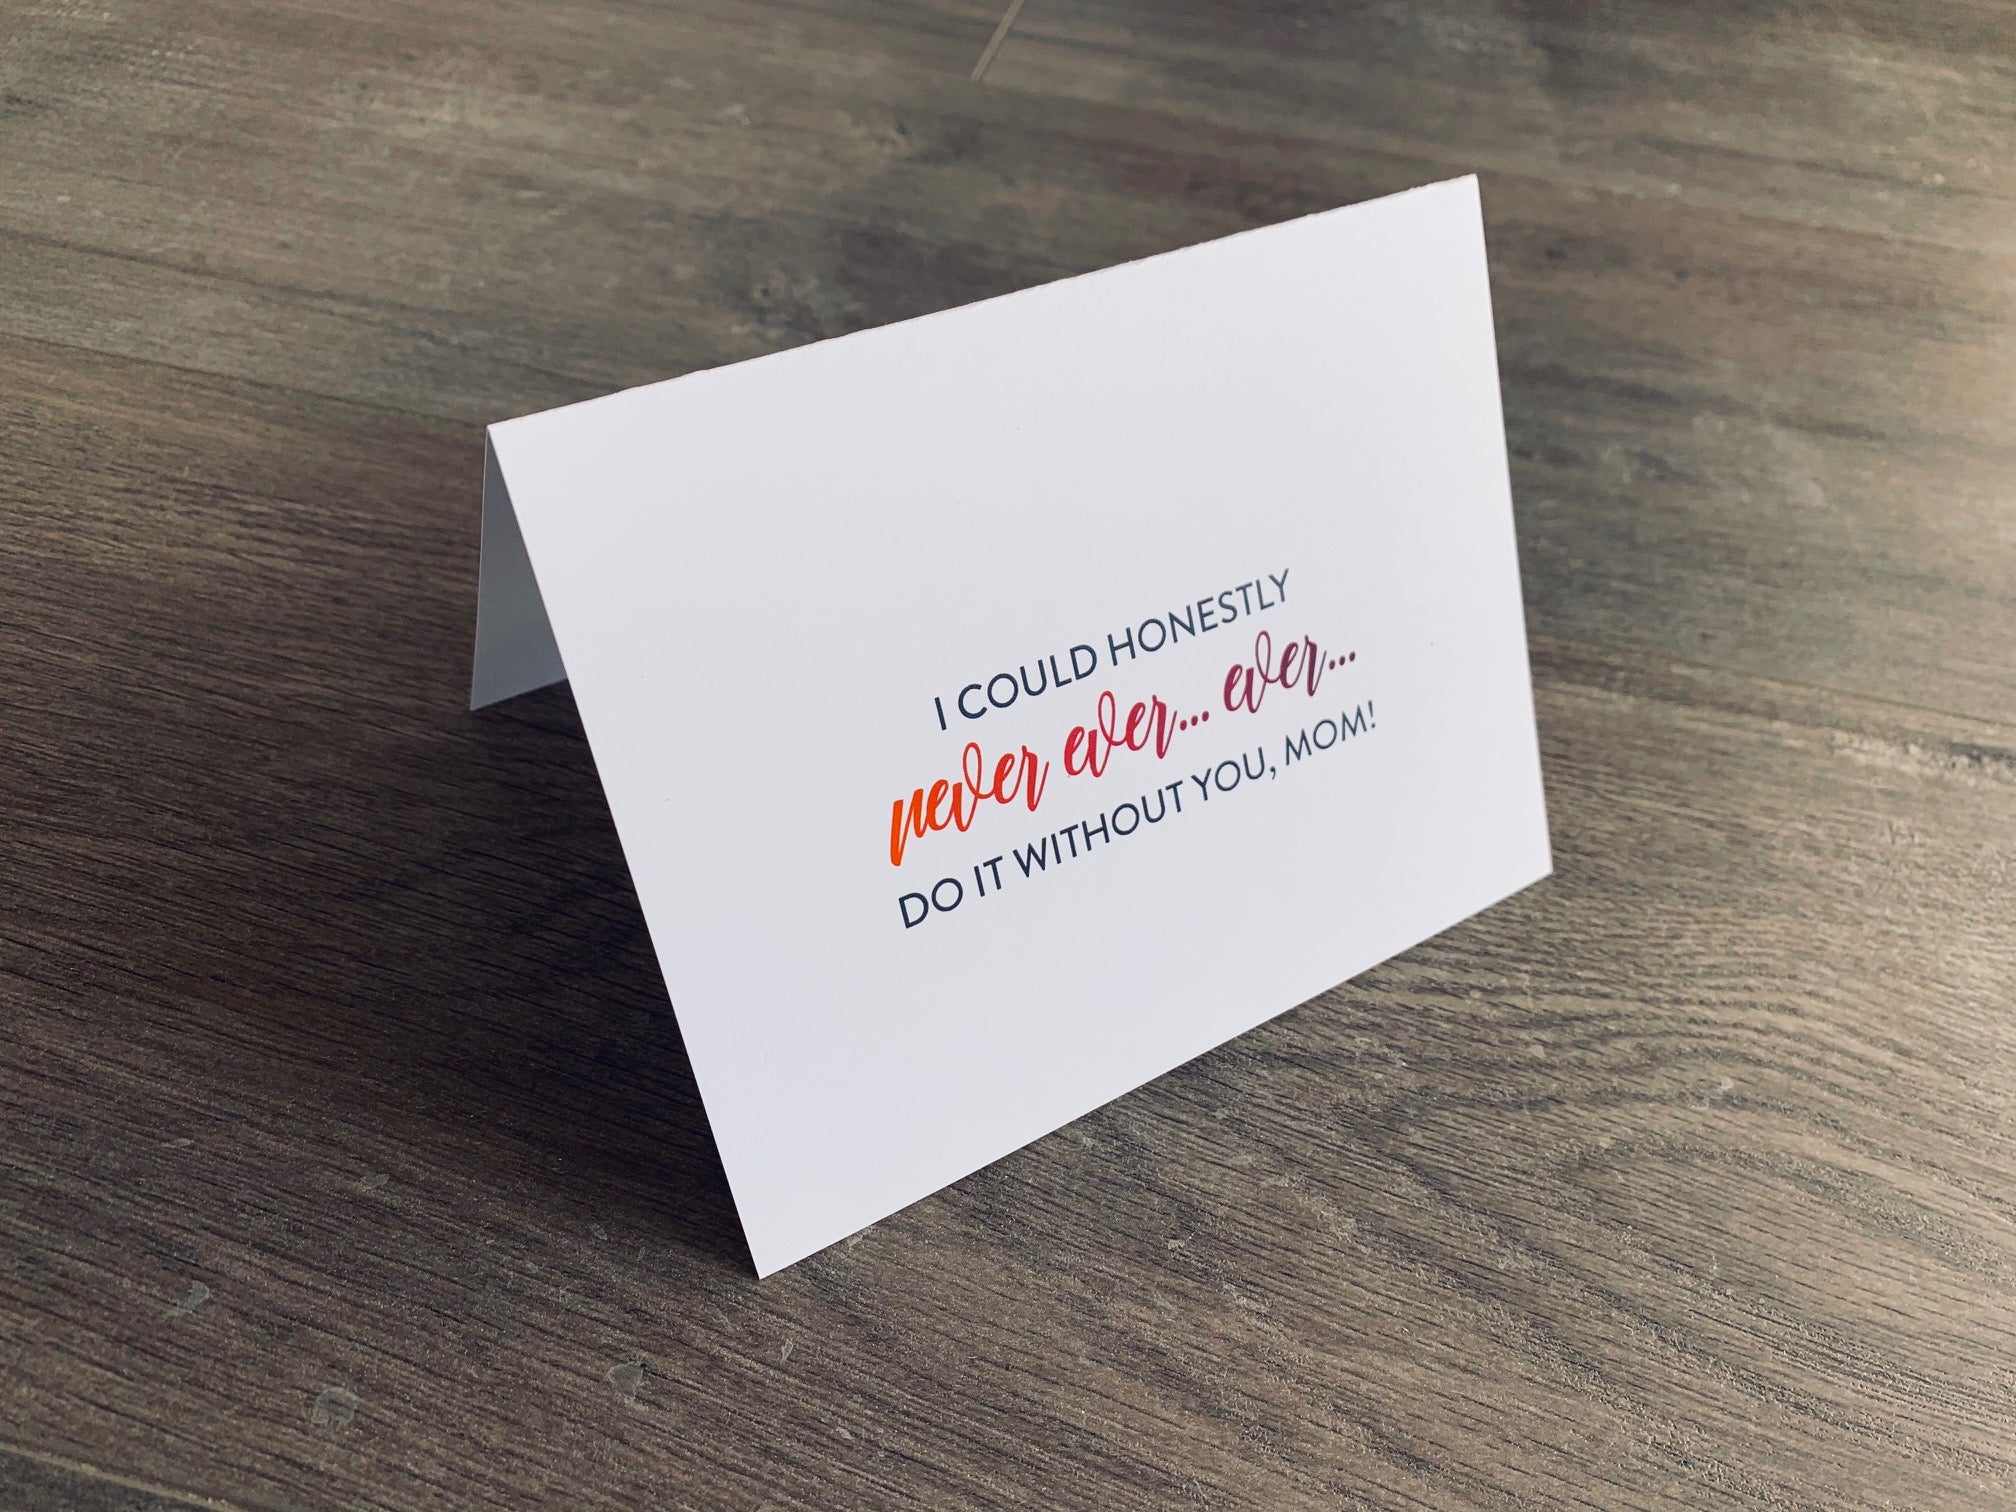 A white folded notecard is propped up on a gray wooden floor. The card says, "I could honestly never ever... ever... do it without you, Mom!" Mother's Day card by Stationare.